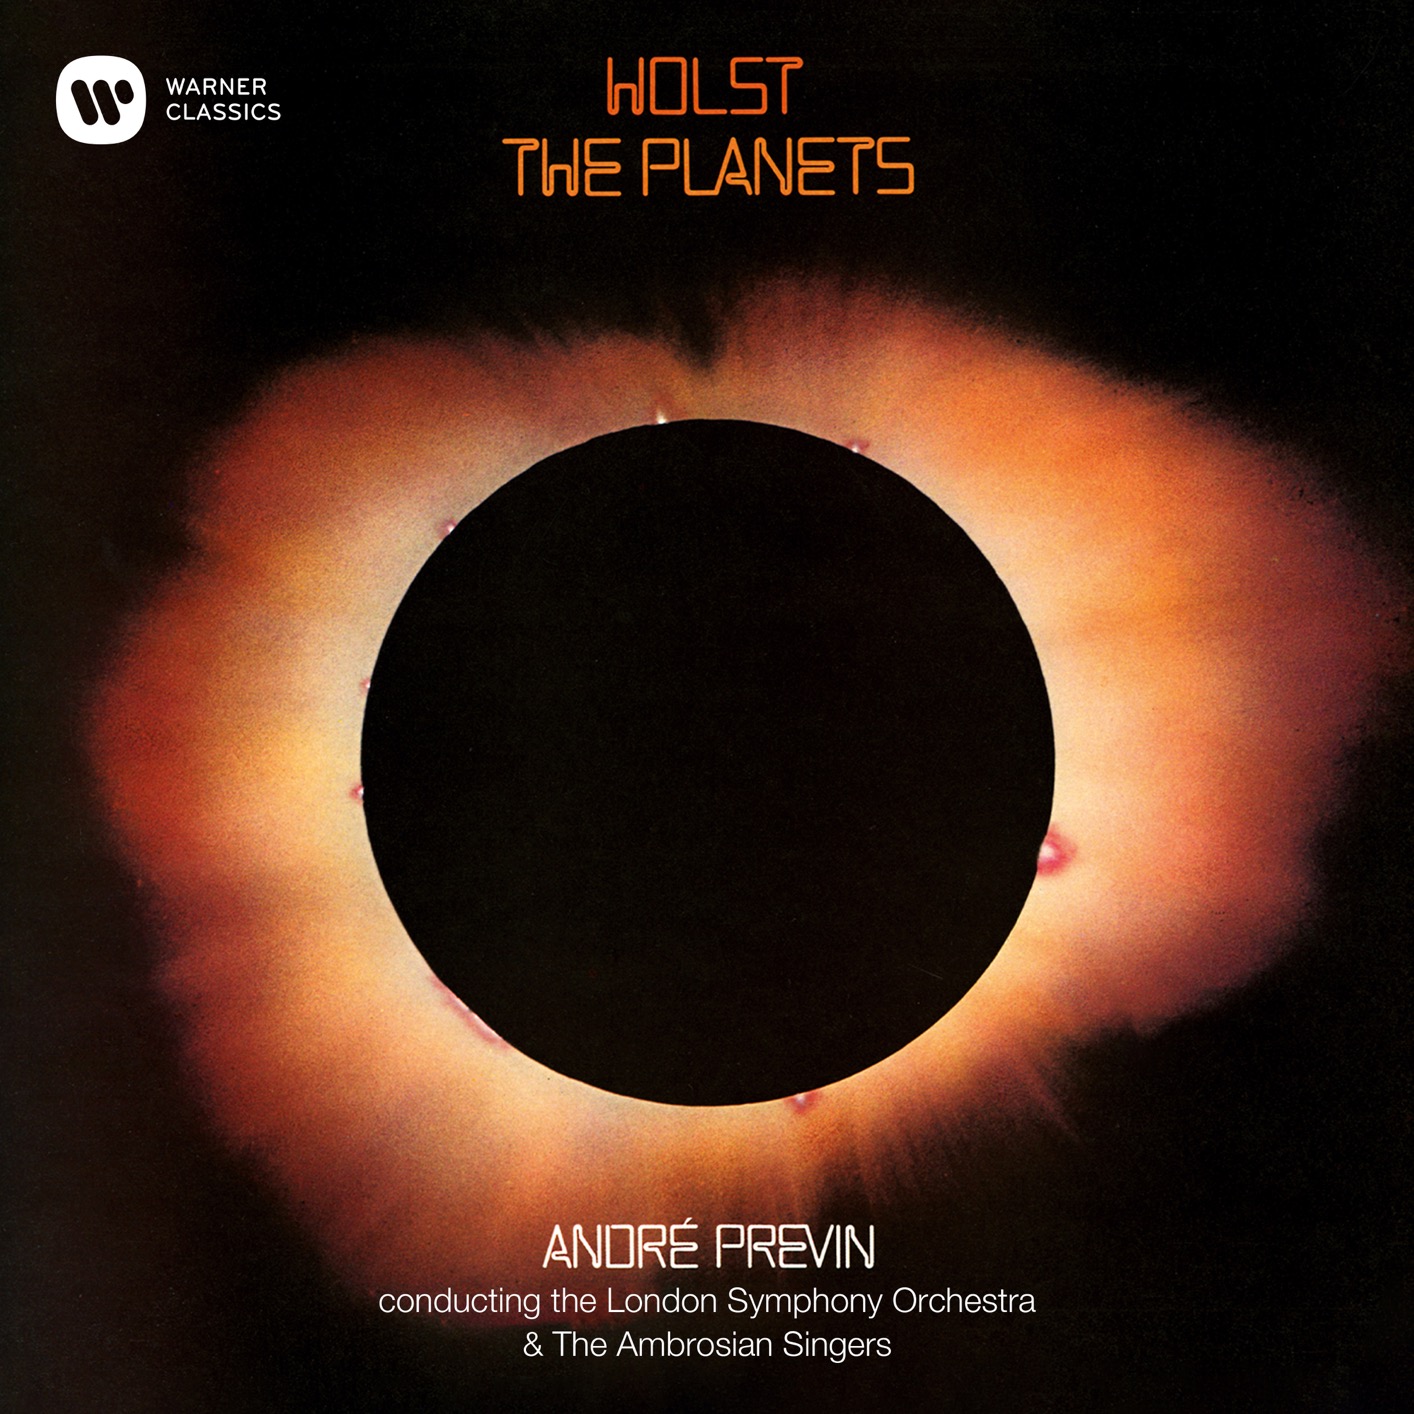 Andre Previn - Holst: The Planets, Op. 32 (1974/2019) [FLAC 24bit/96kHz]